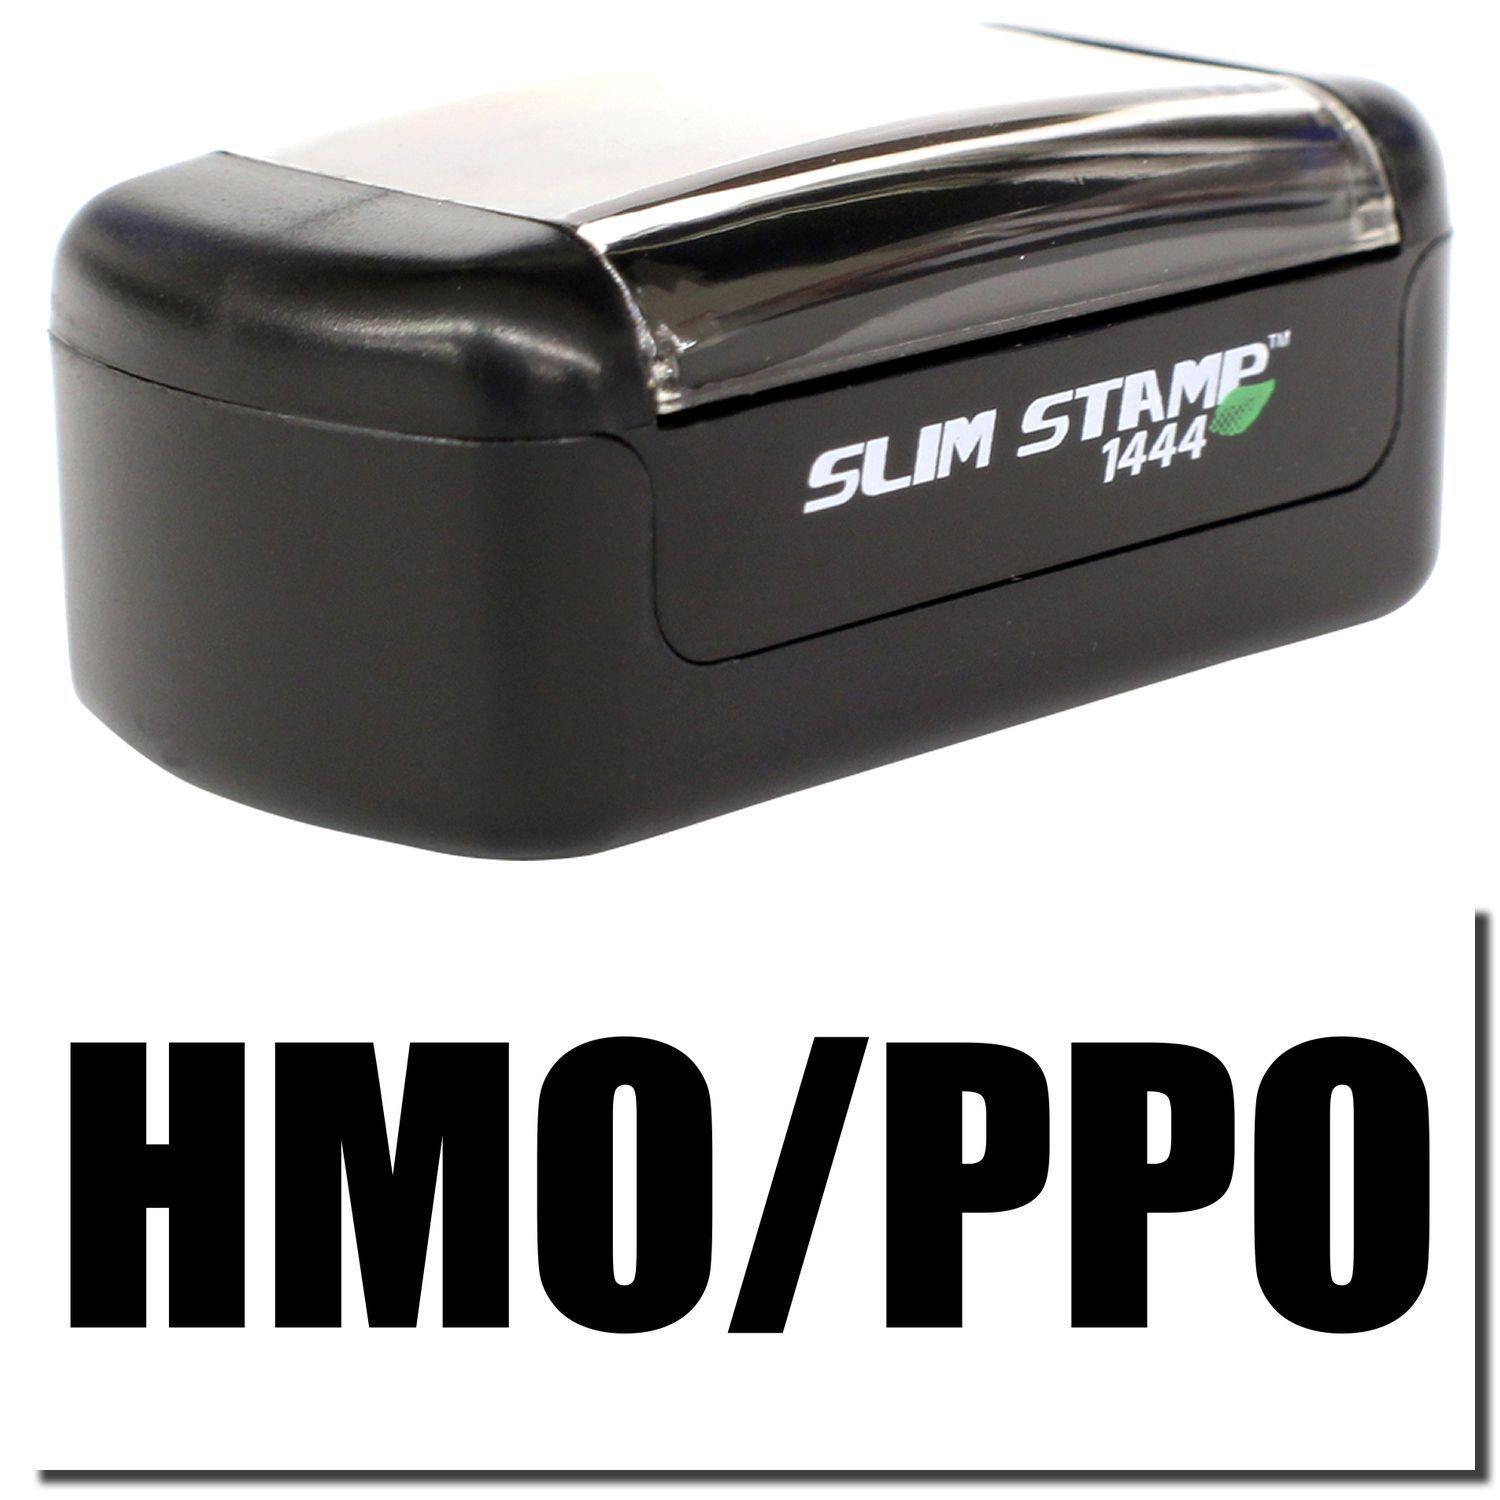 A stock office pre-inked stamp with a stamped image showing how the text "HMO/PPO" is displayed after stamping.